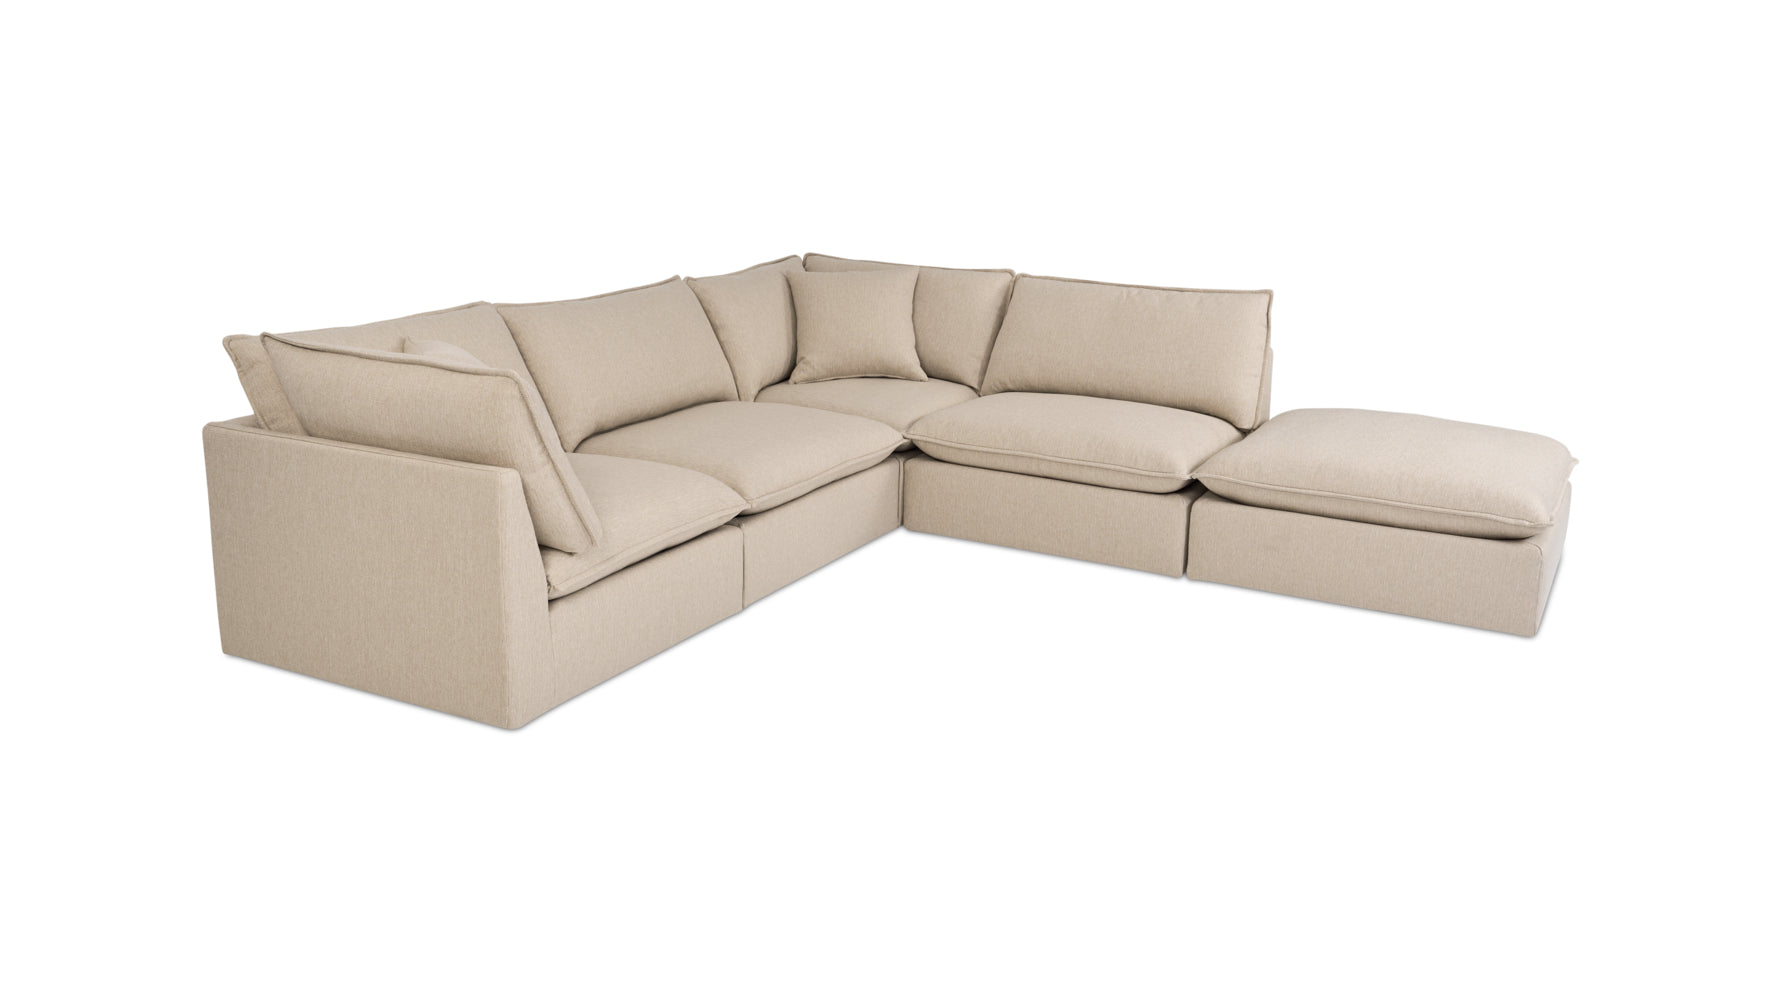 Chill Time 5-Piece Modular Sectional, Biscuit - Image 2